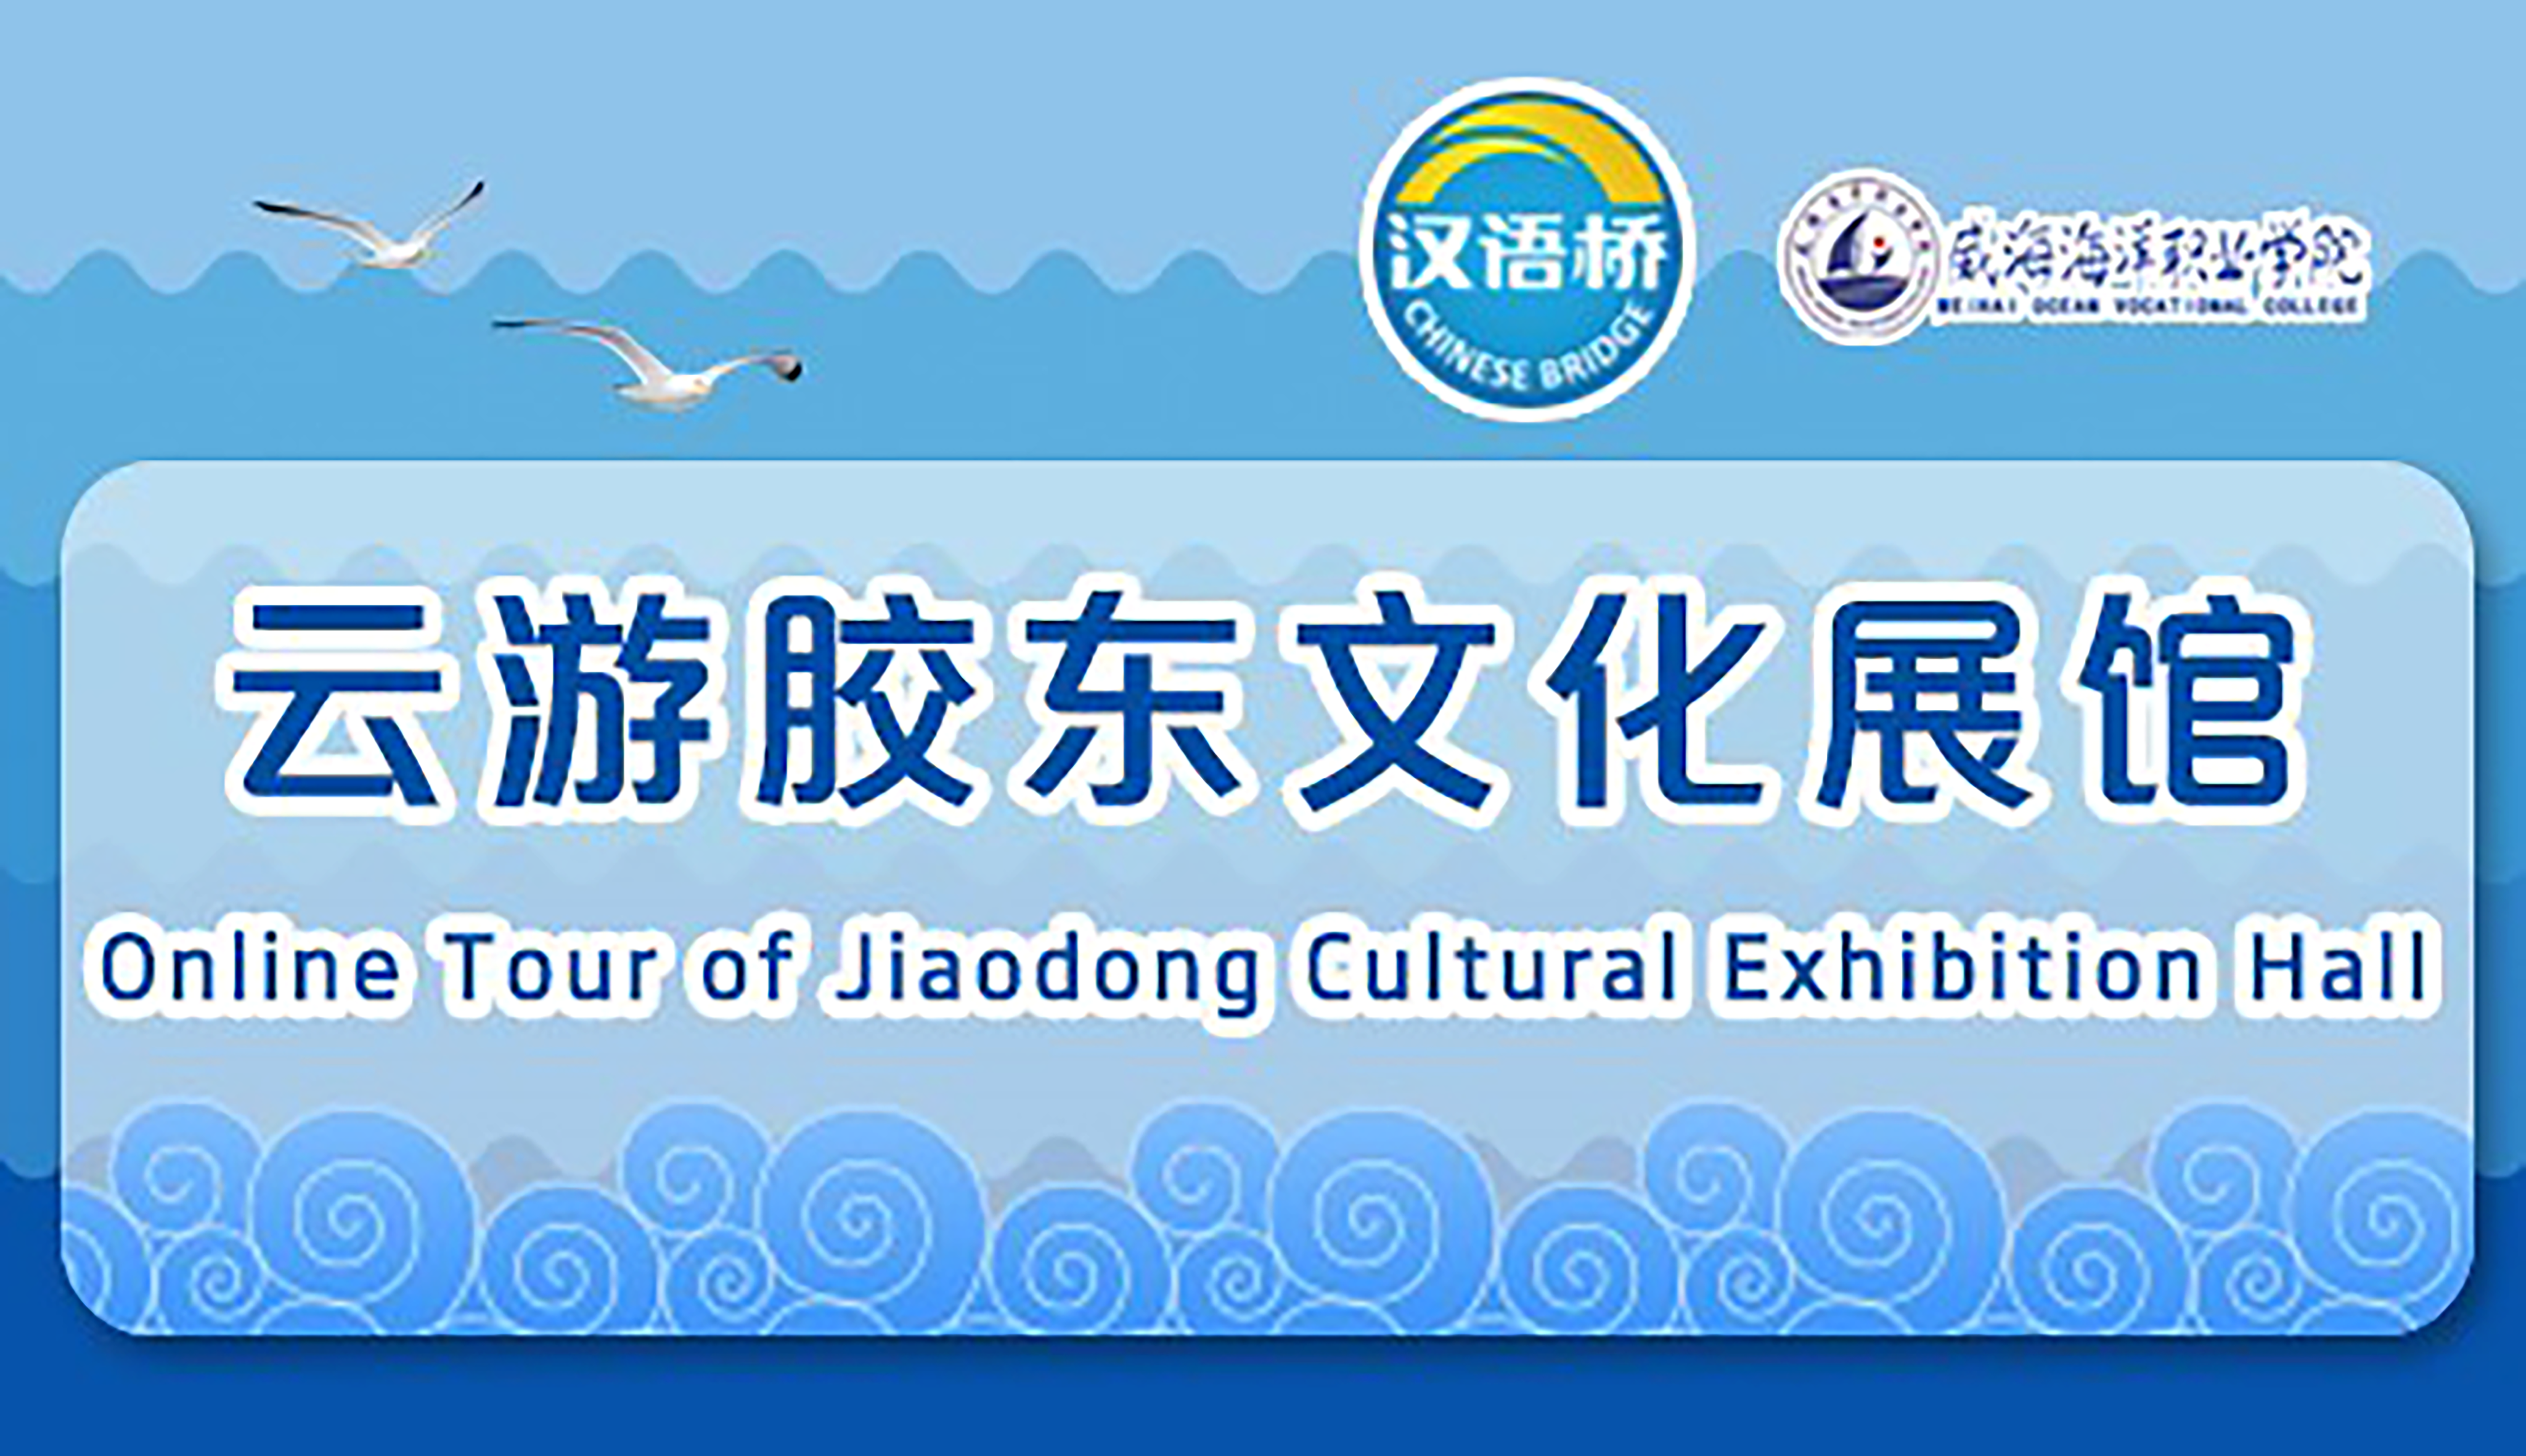 Online Tour of Jiaodong Cultural Exhibition Hall